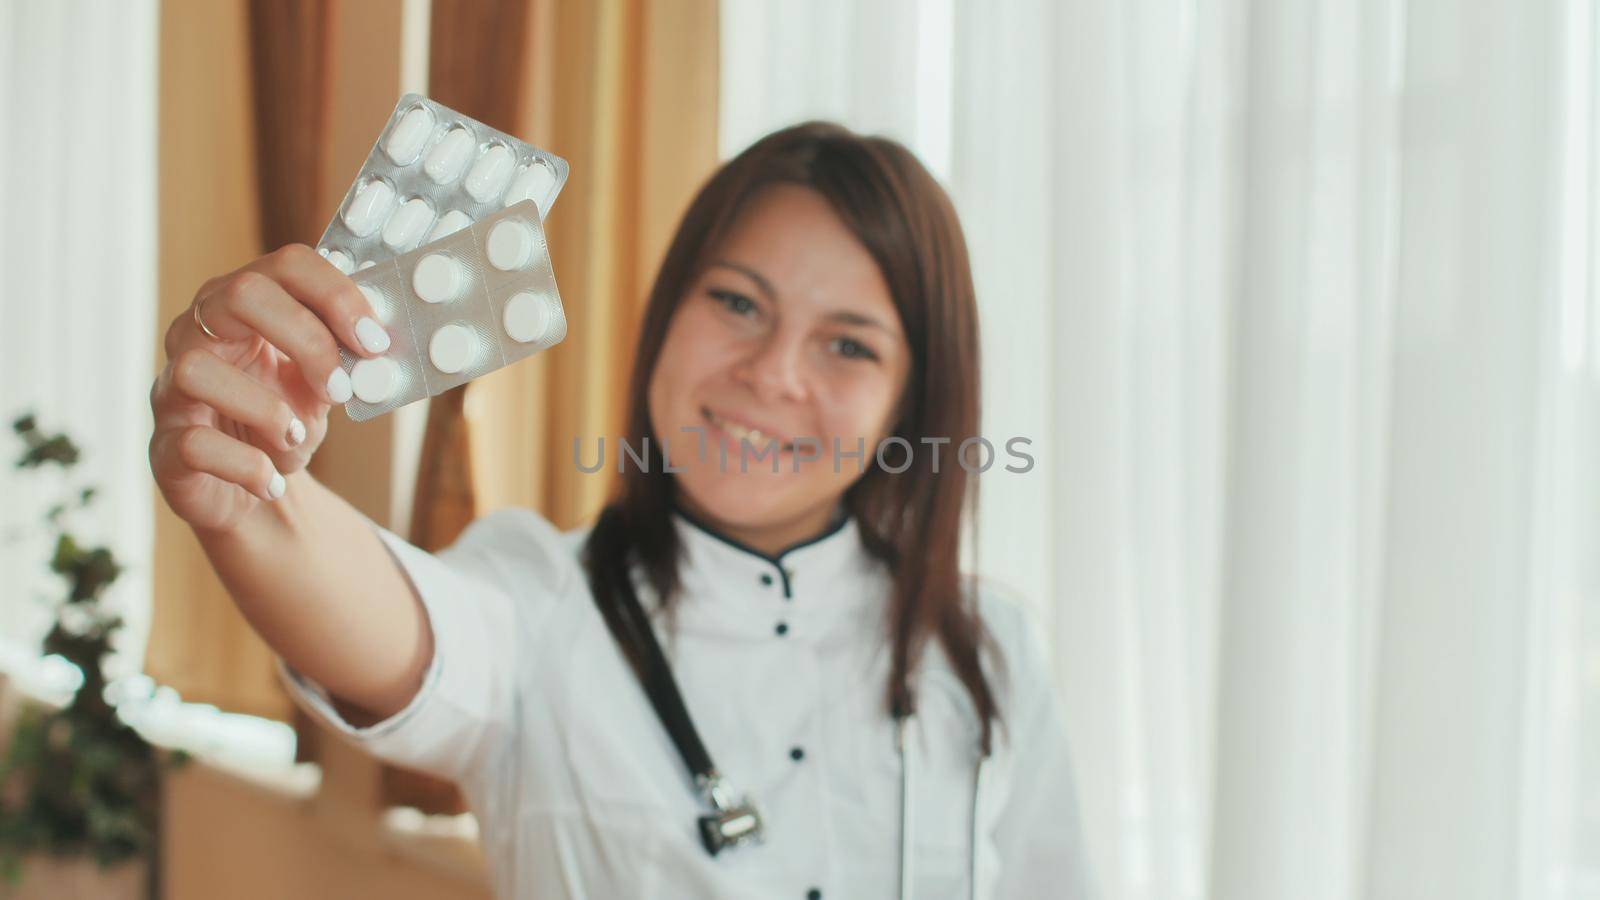 A young girl doctor demonstrates in the hands of a package of pills